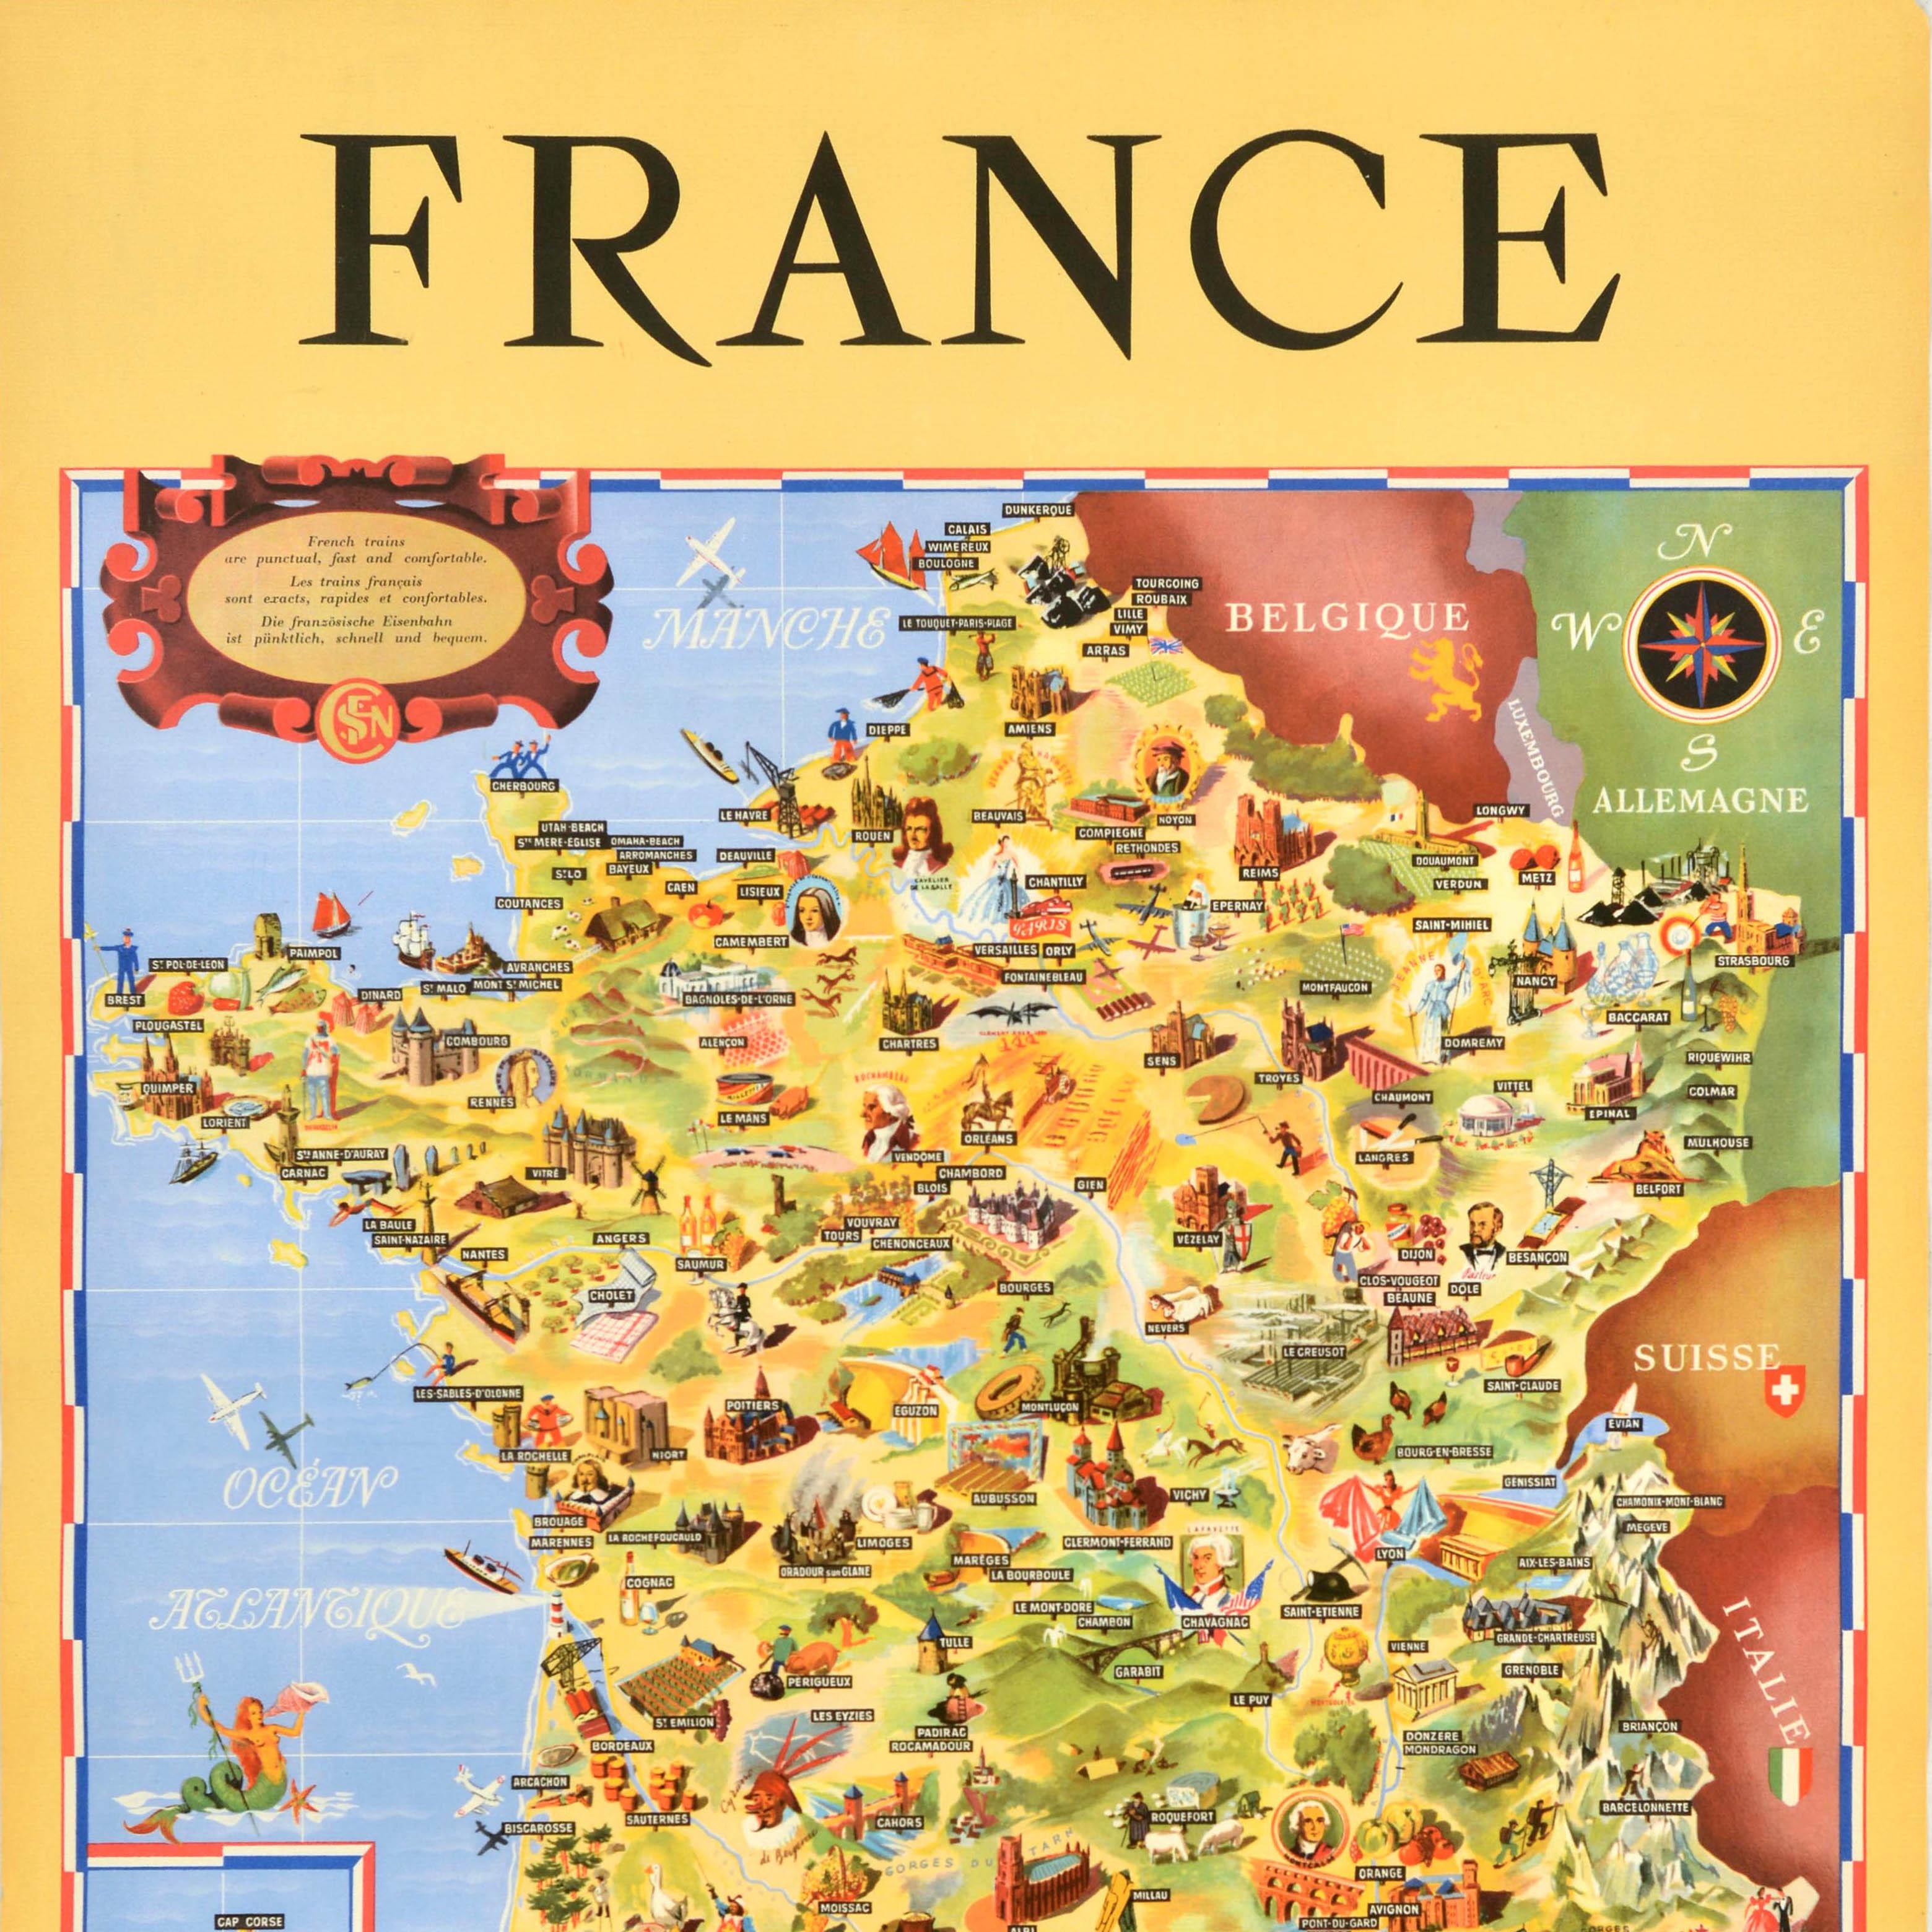 Original vintage rail travel map poster - France Societe Nationale des Chemins de Fer Francais - featuring a colourful illustrated map by Jean Cheval and Alex Batany (as Cheval-Batany) of places of interest and landmarks including ancient and